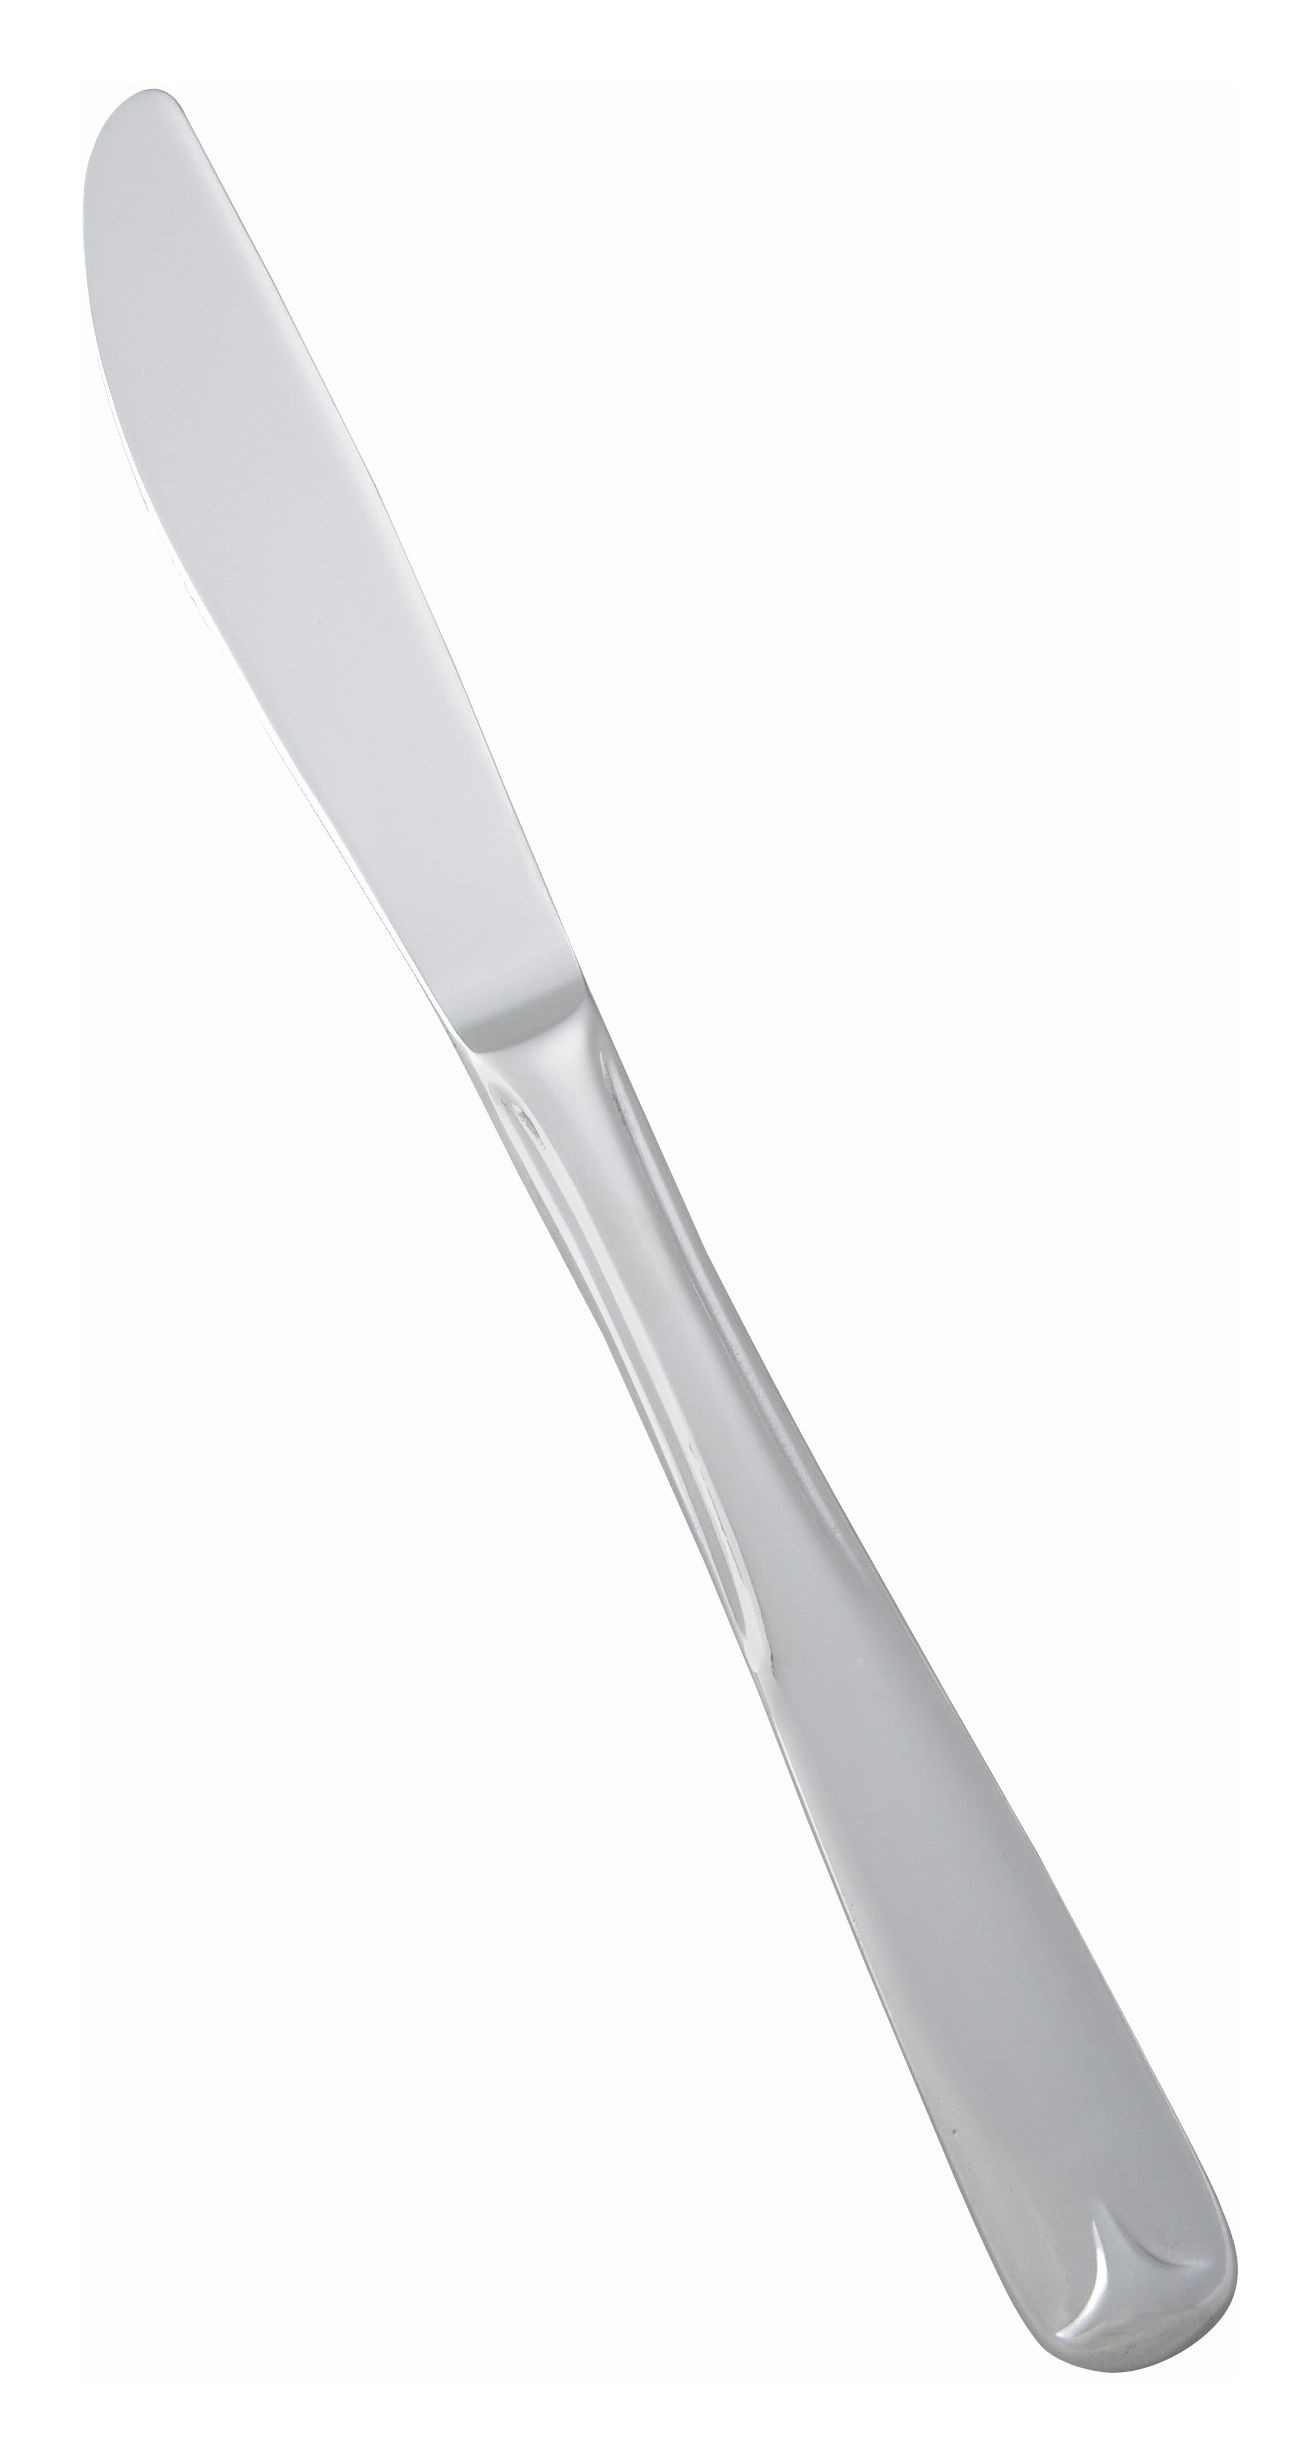 Winco 0010-08 Lisa Heavy Weight Mirror Finish Stainless Steel Dinner Knife (12/Pack)